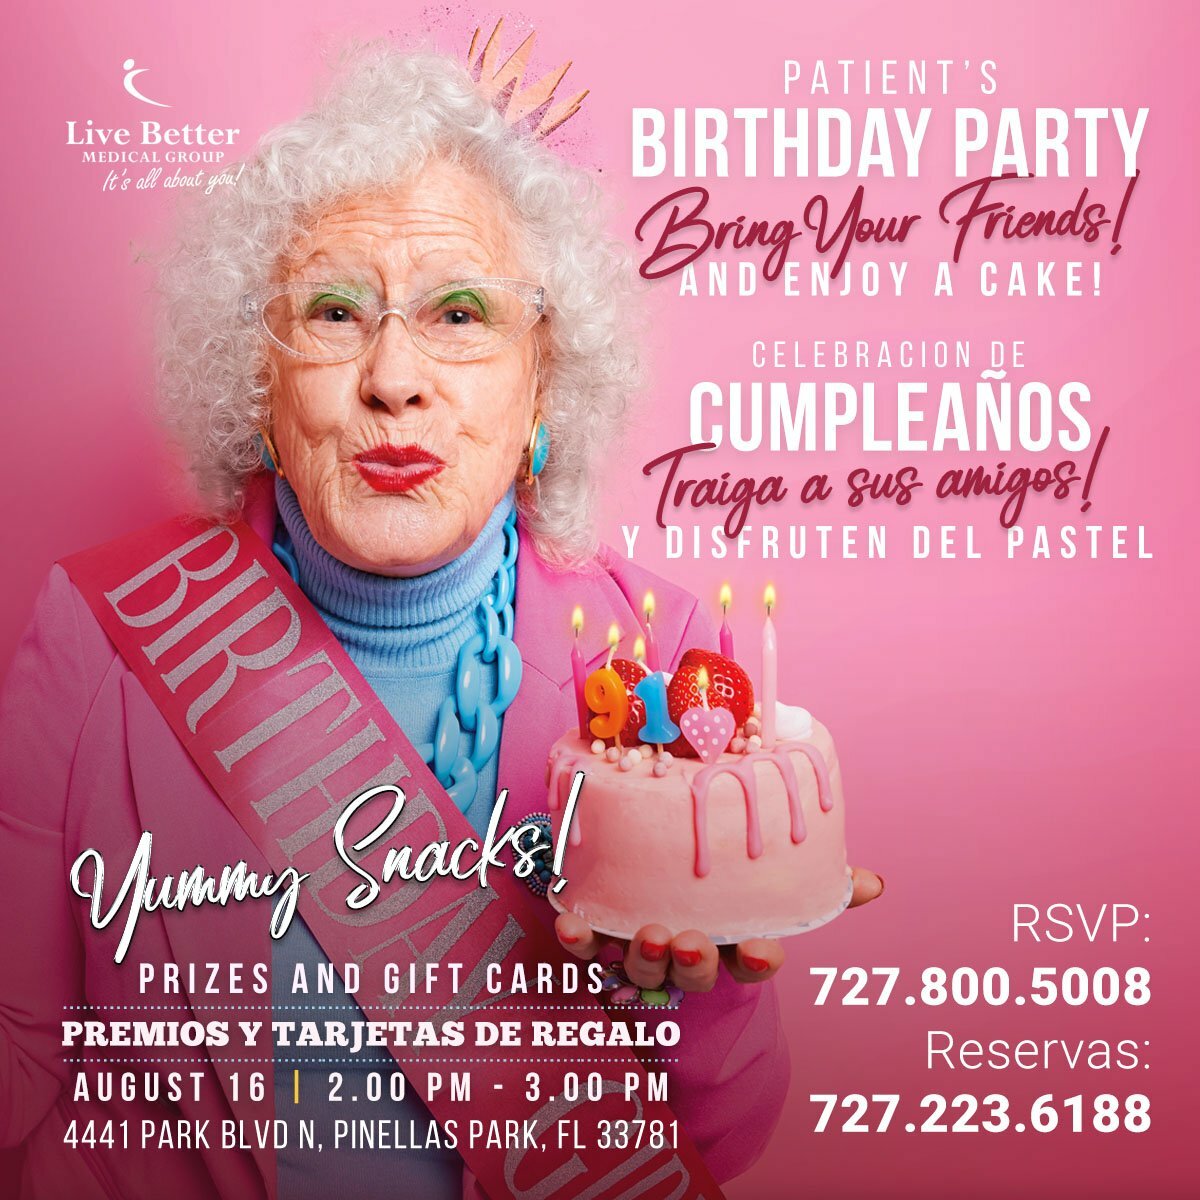 patients_birthady_party_live_better_medical_group_pinellas_august